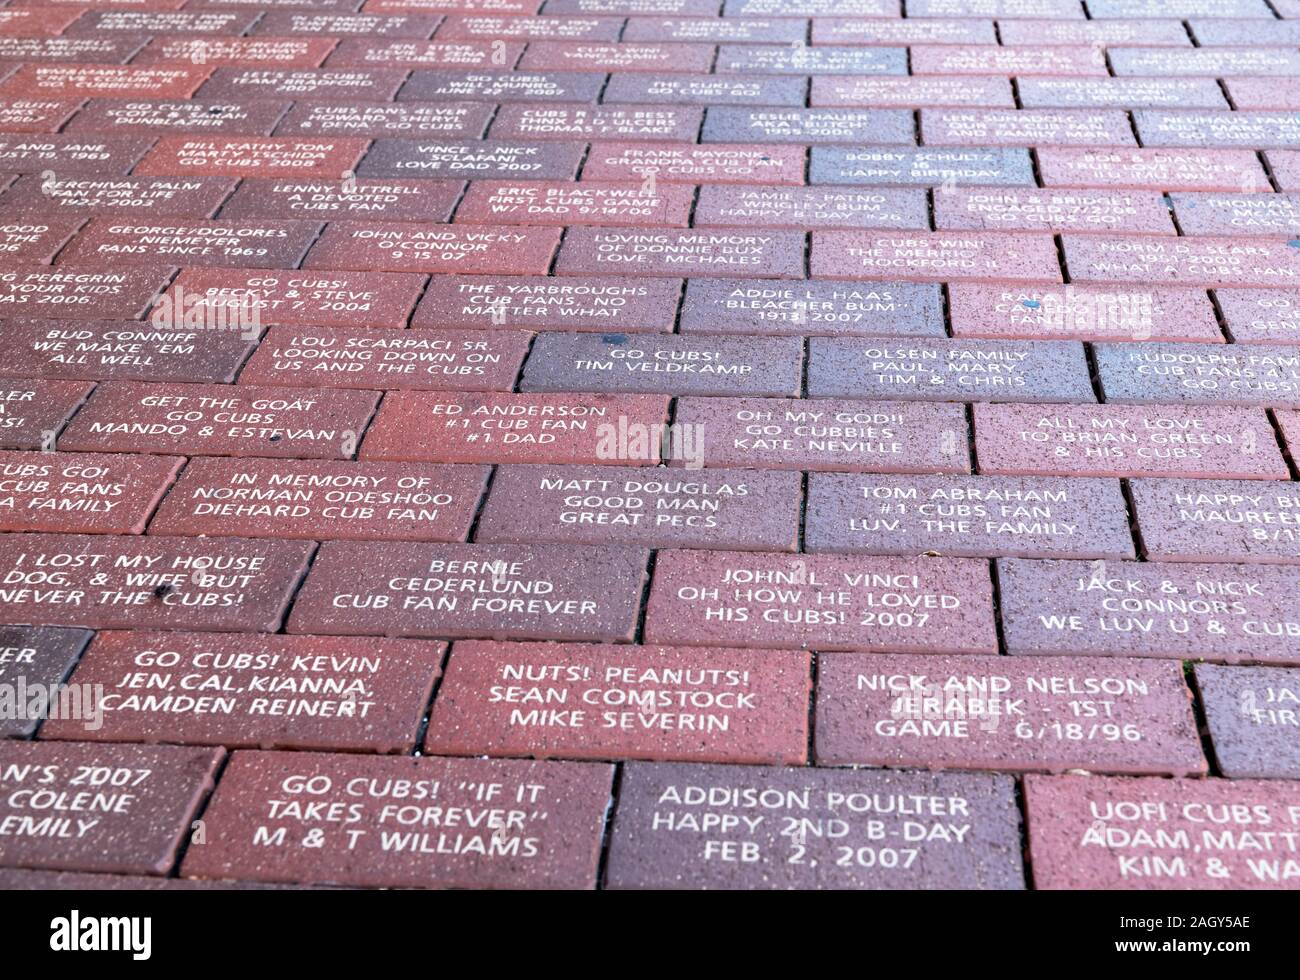 Commemorative brick pavers, paid for by fans, on the sidewalk outside Wrigley Field baseball park, Chicago, Illinois, USA Stock Photo